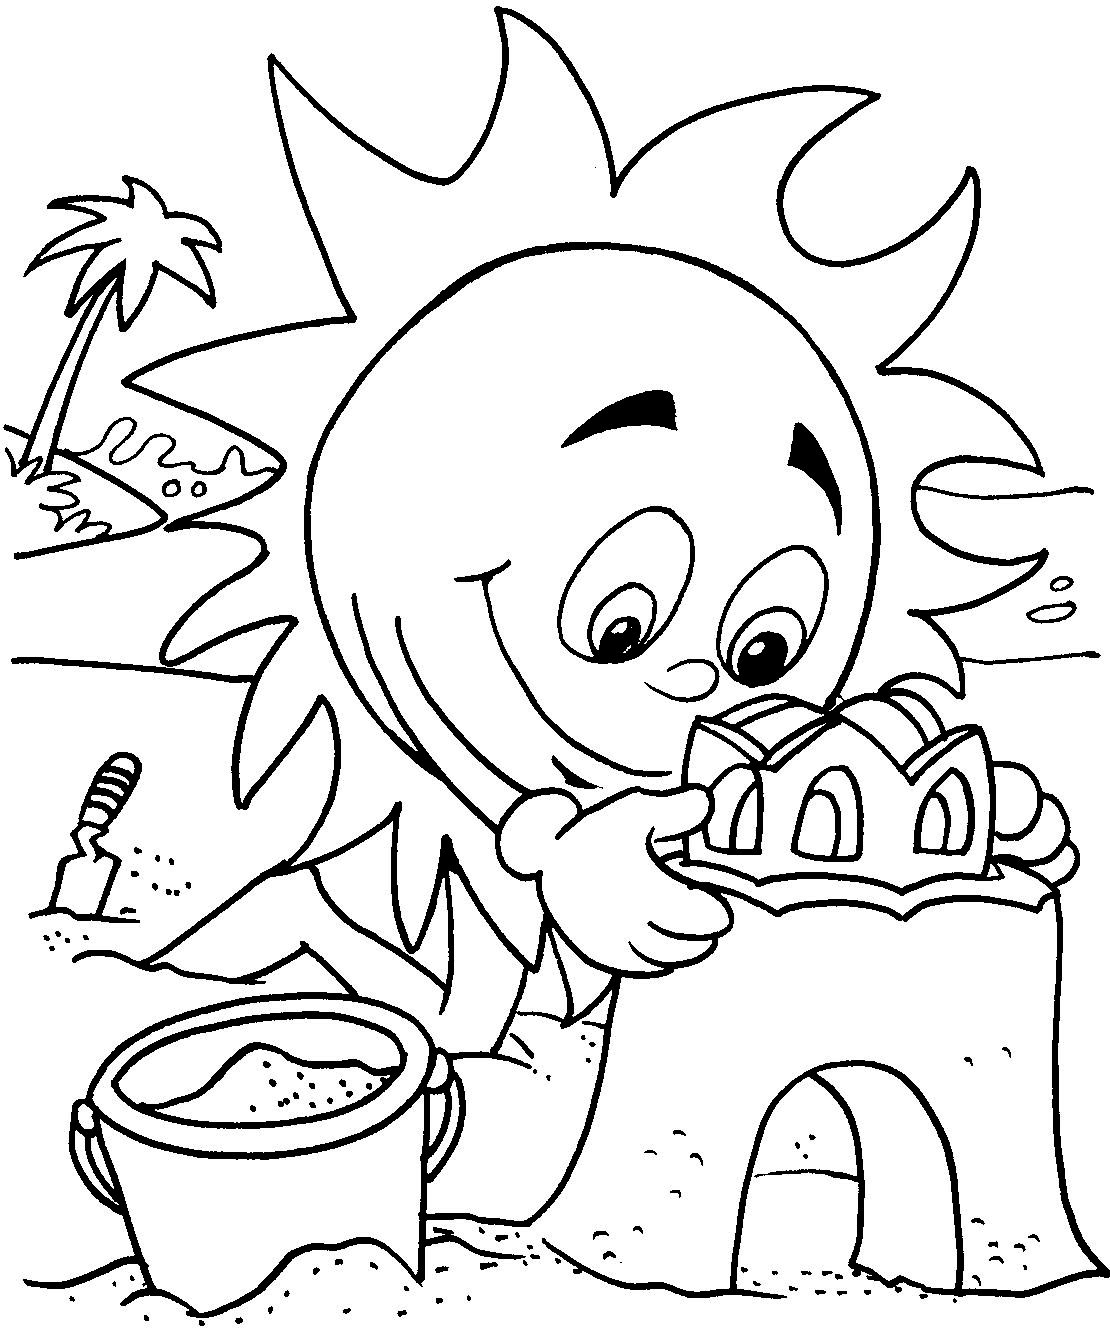 Sun at beach coloring page